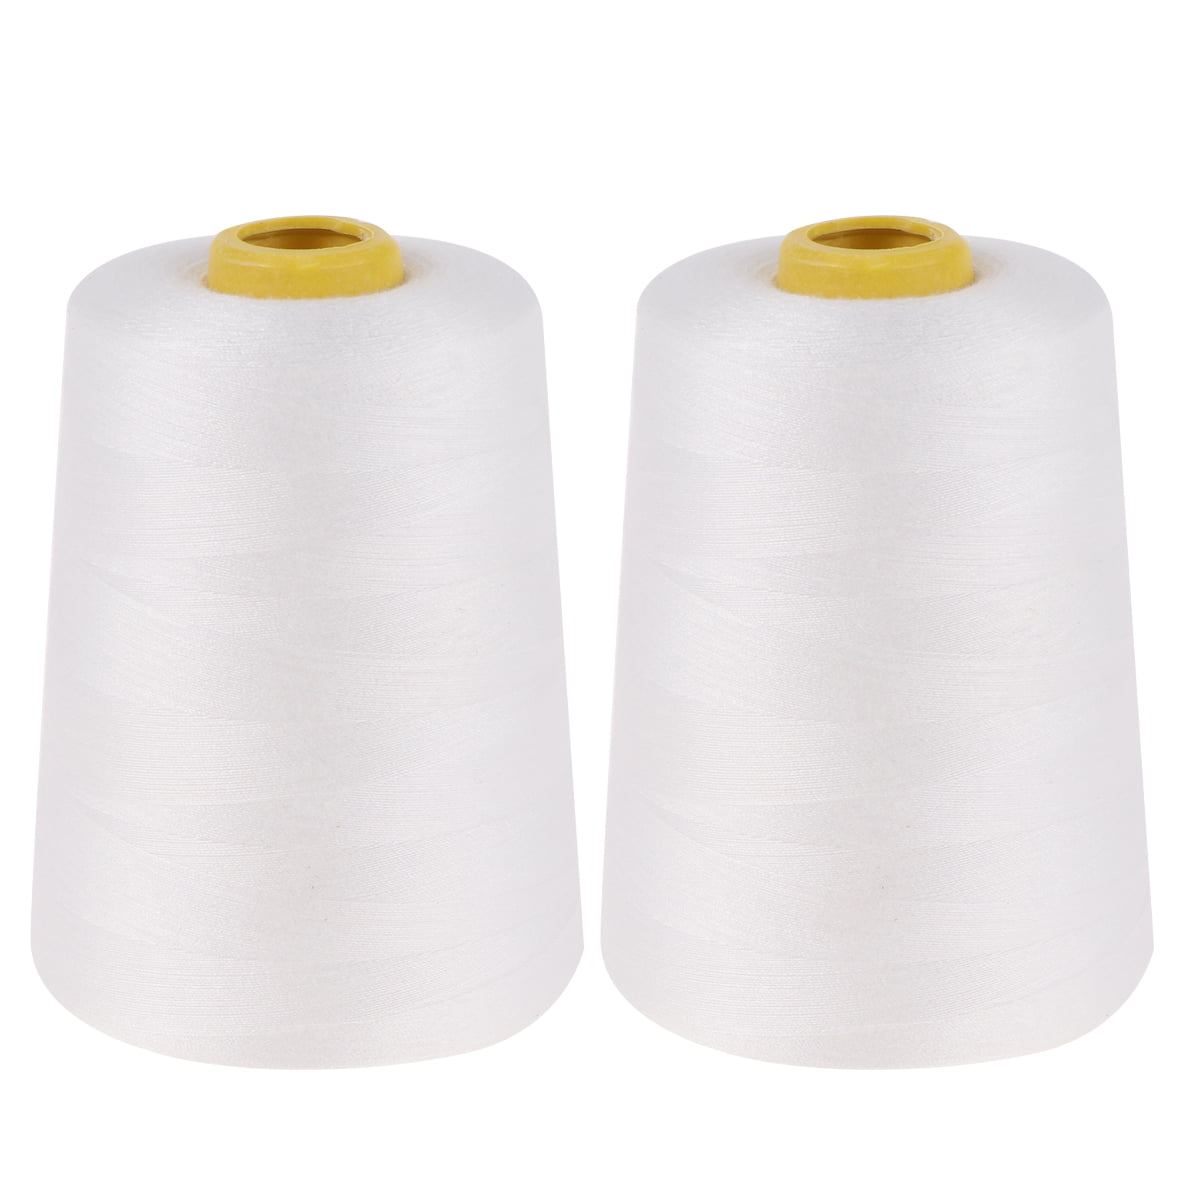 MILISTEN 3PCS Polyester Sewing Thread Sewing Thread for Clothes Thick  Sewing Thread Stitching Thread Floss Sewing Thread for Pants Overcoat  Sewing